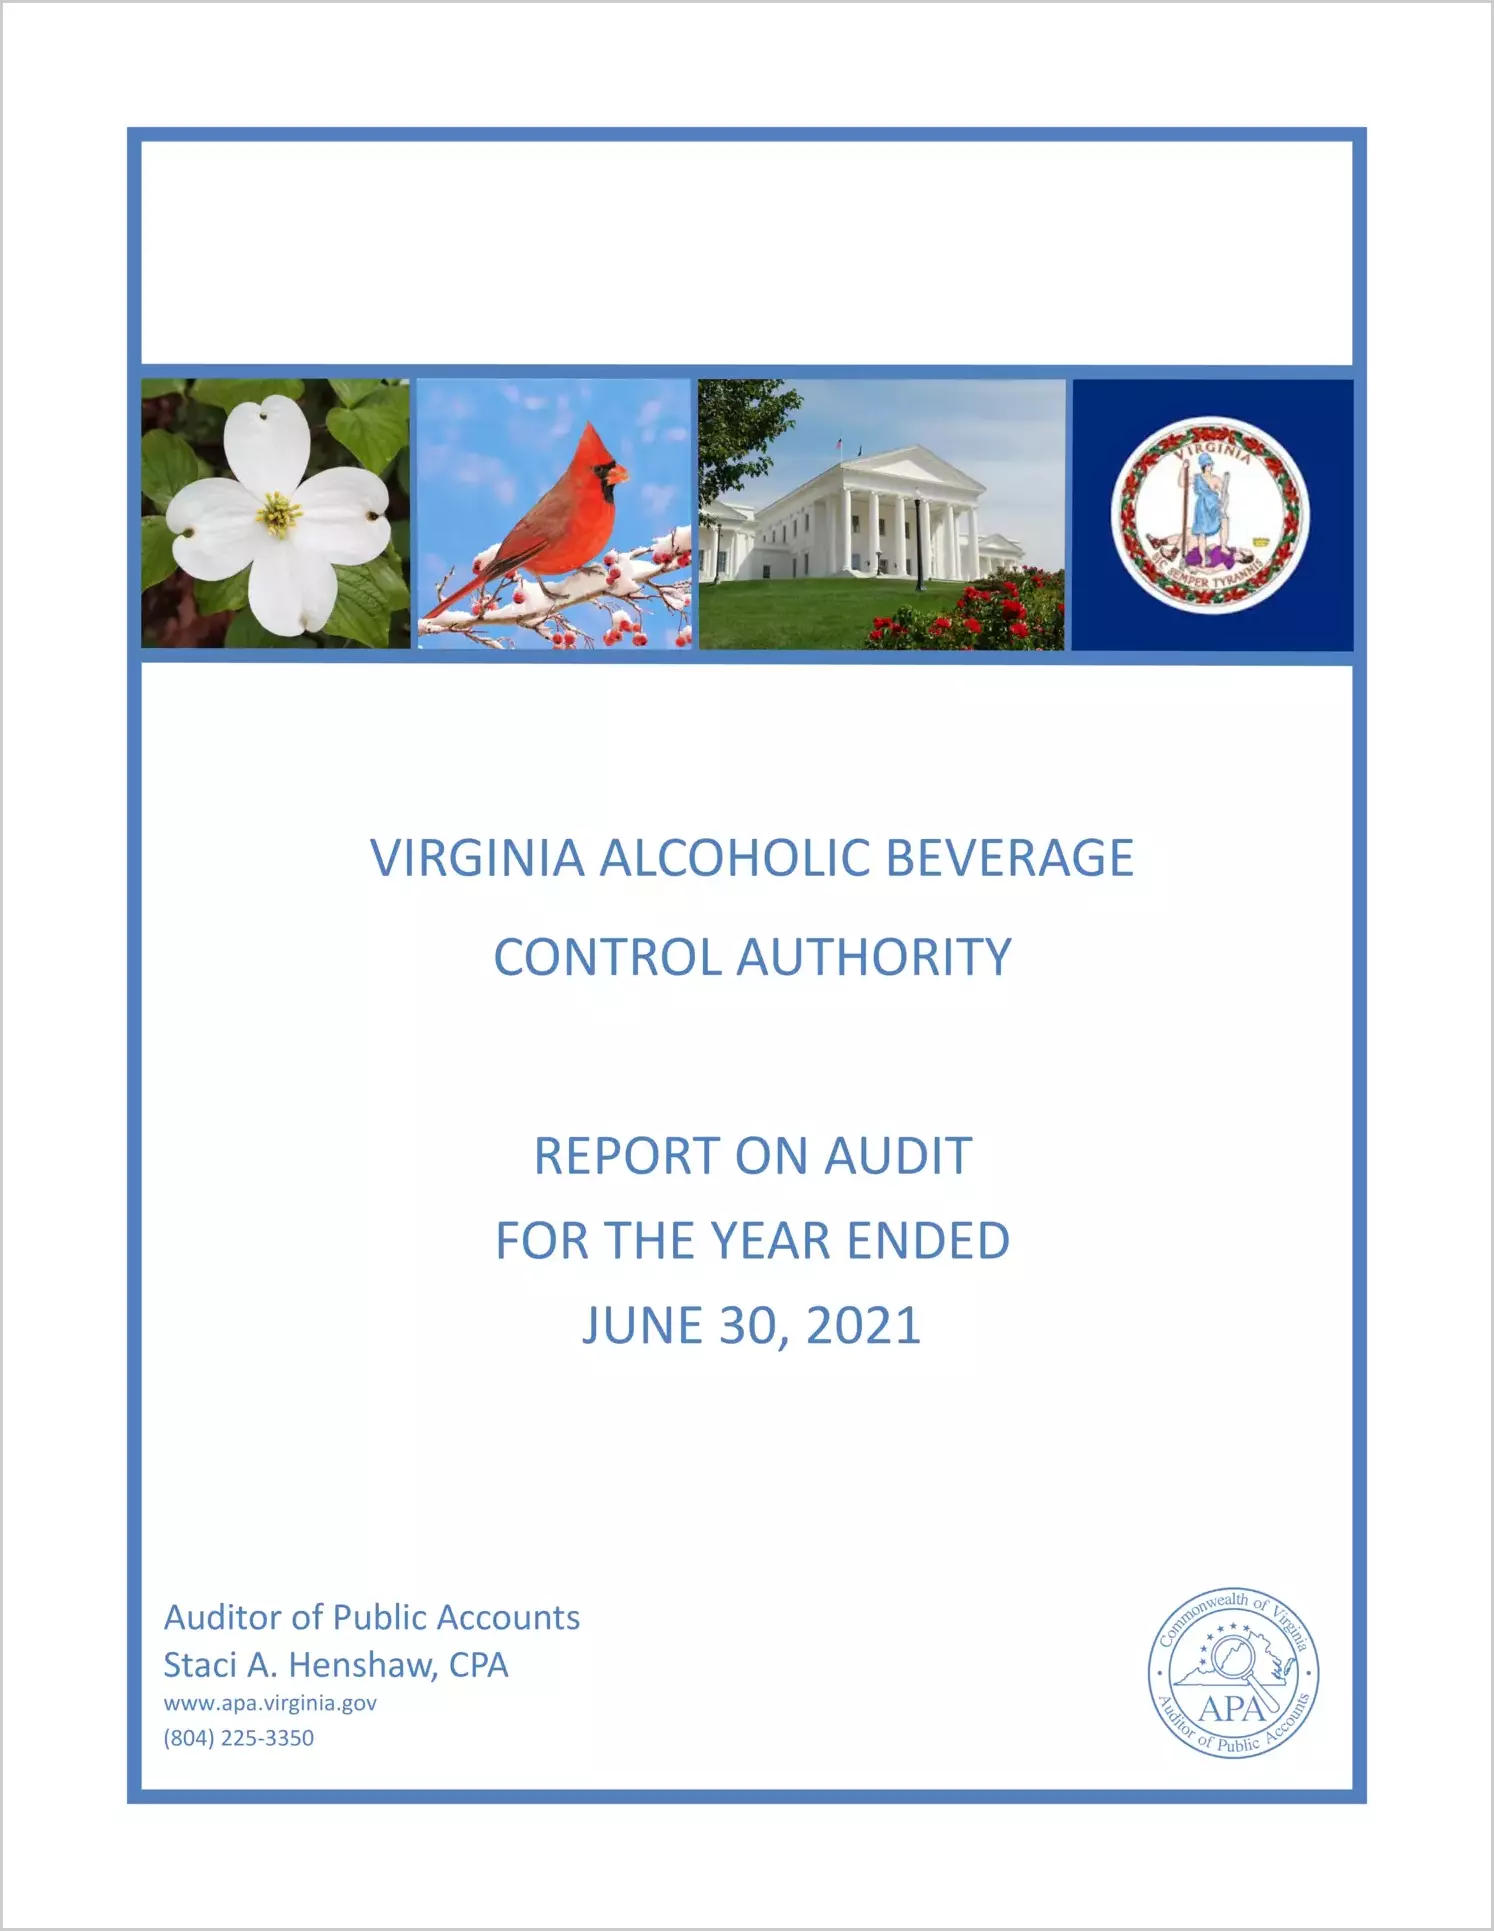 Virginia Alcoholic Beverage Control Authority for the year ended June 30, 2021